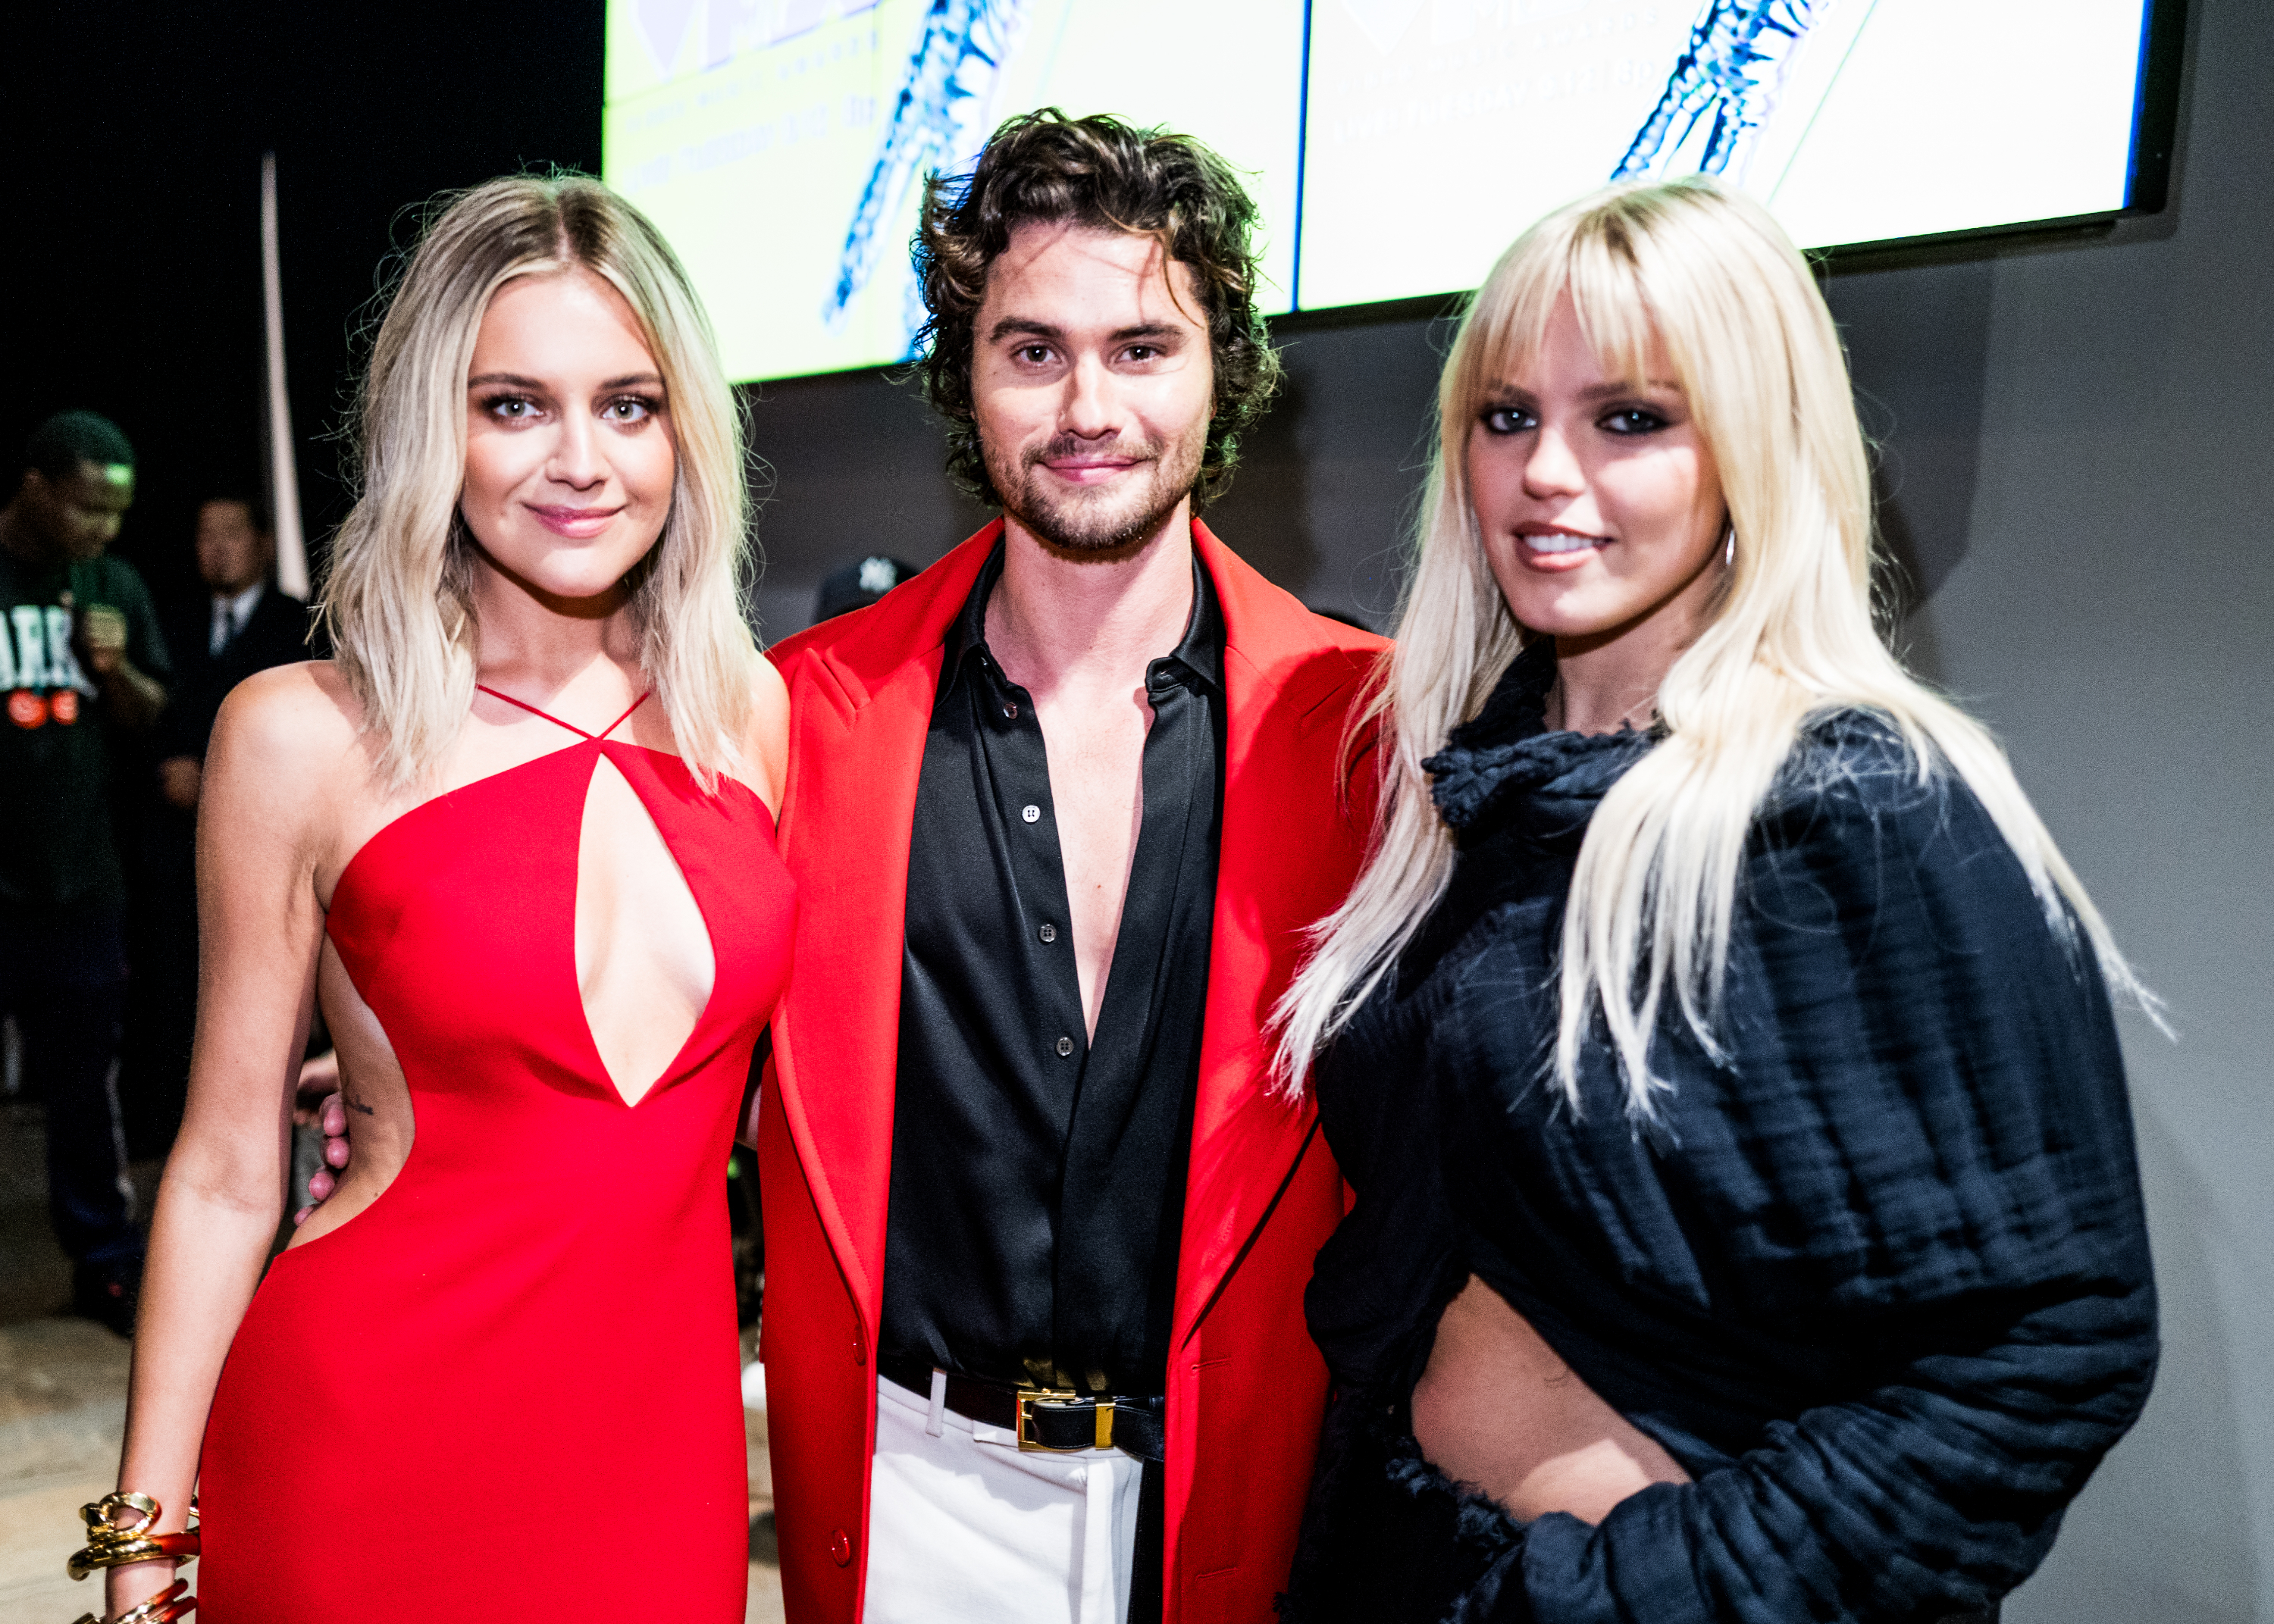 Smiling Kelsea, Chase, and Reneé stand together